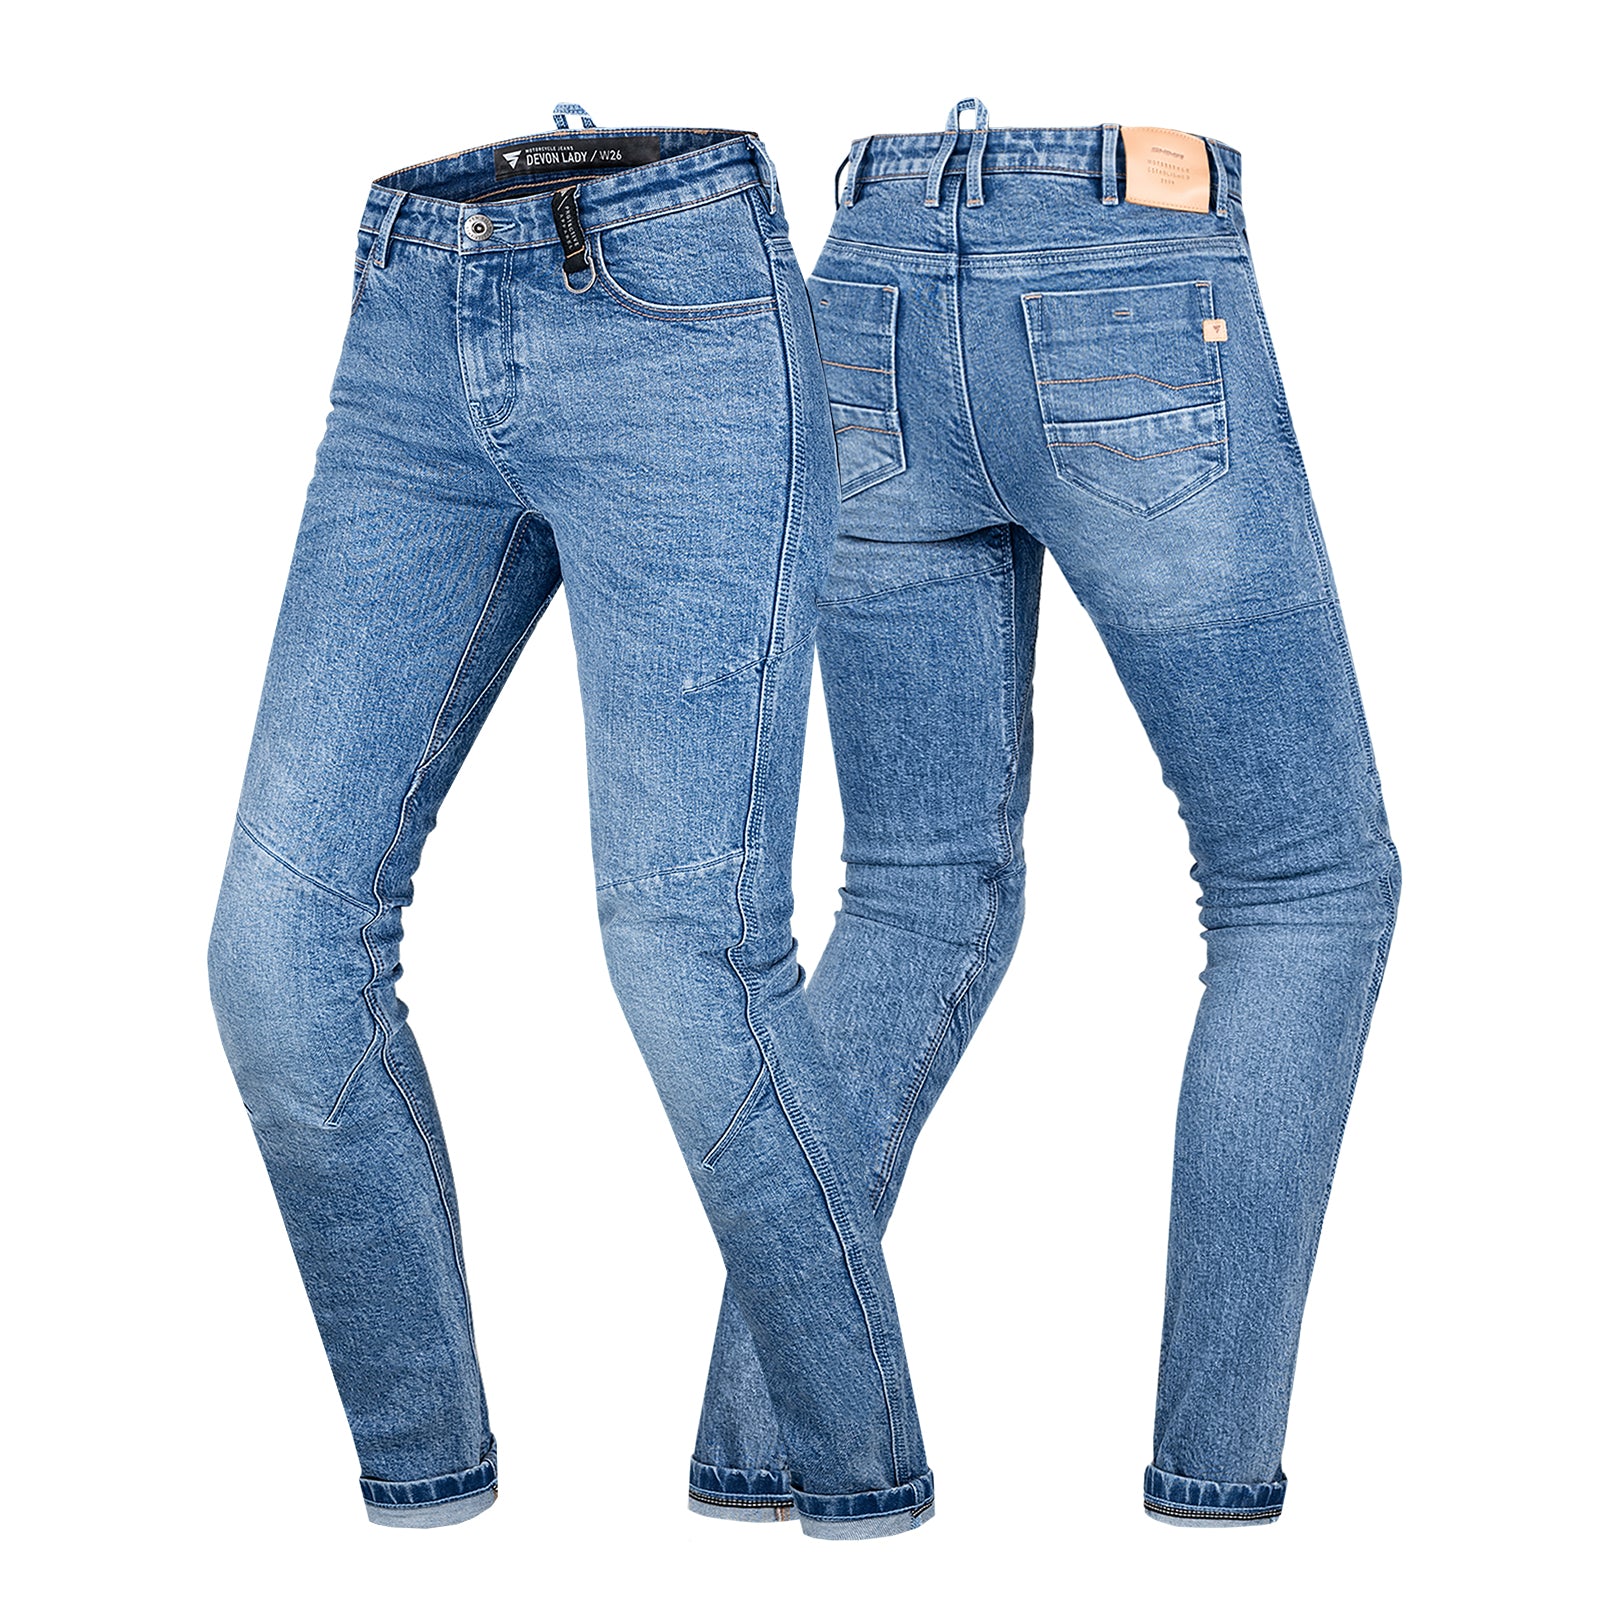 Light blue motorcycle jeans for women from shima